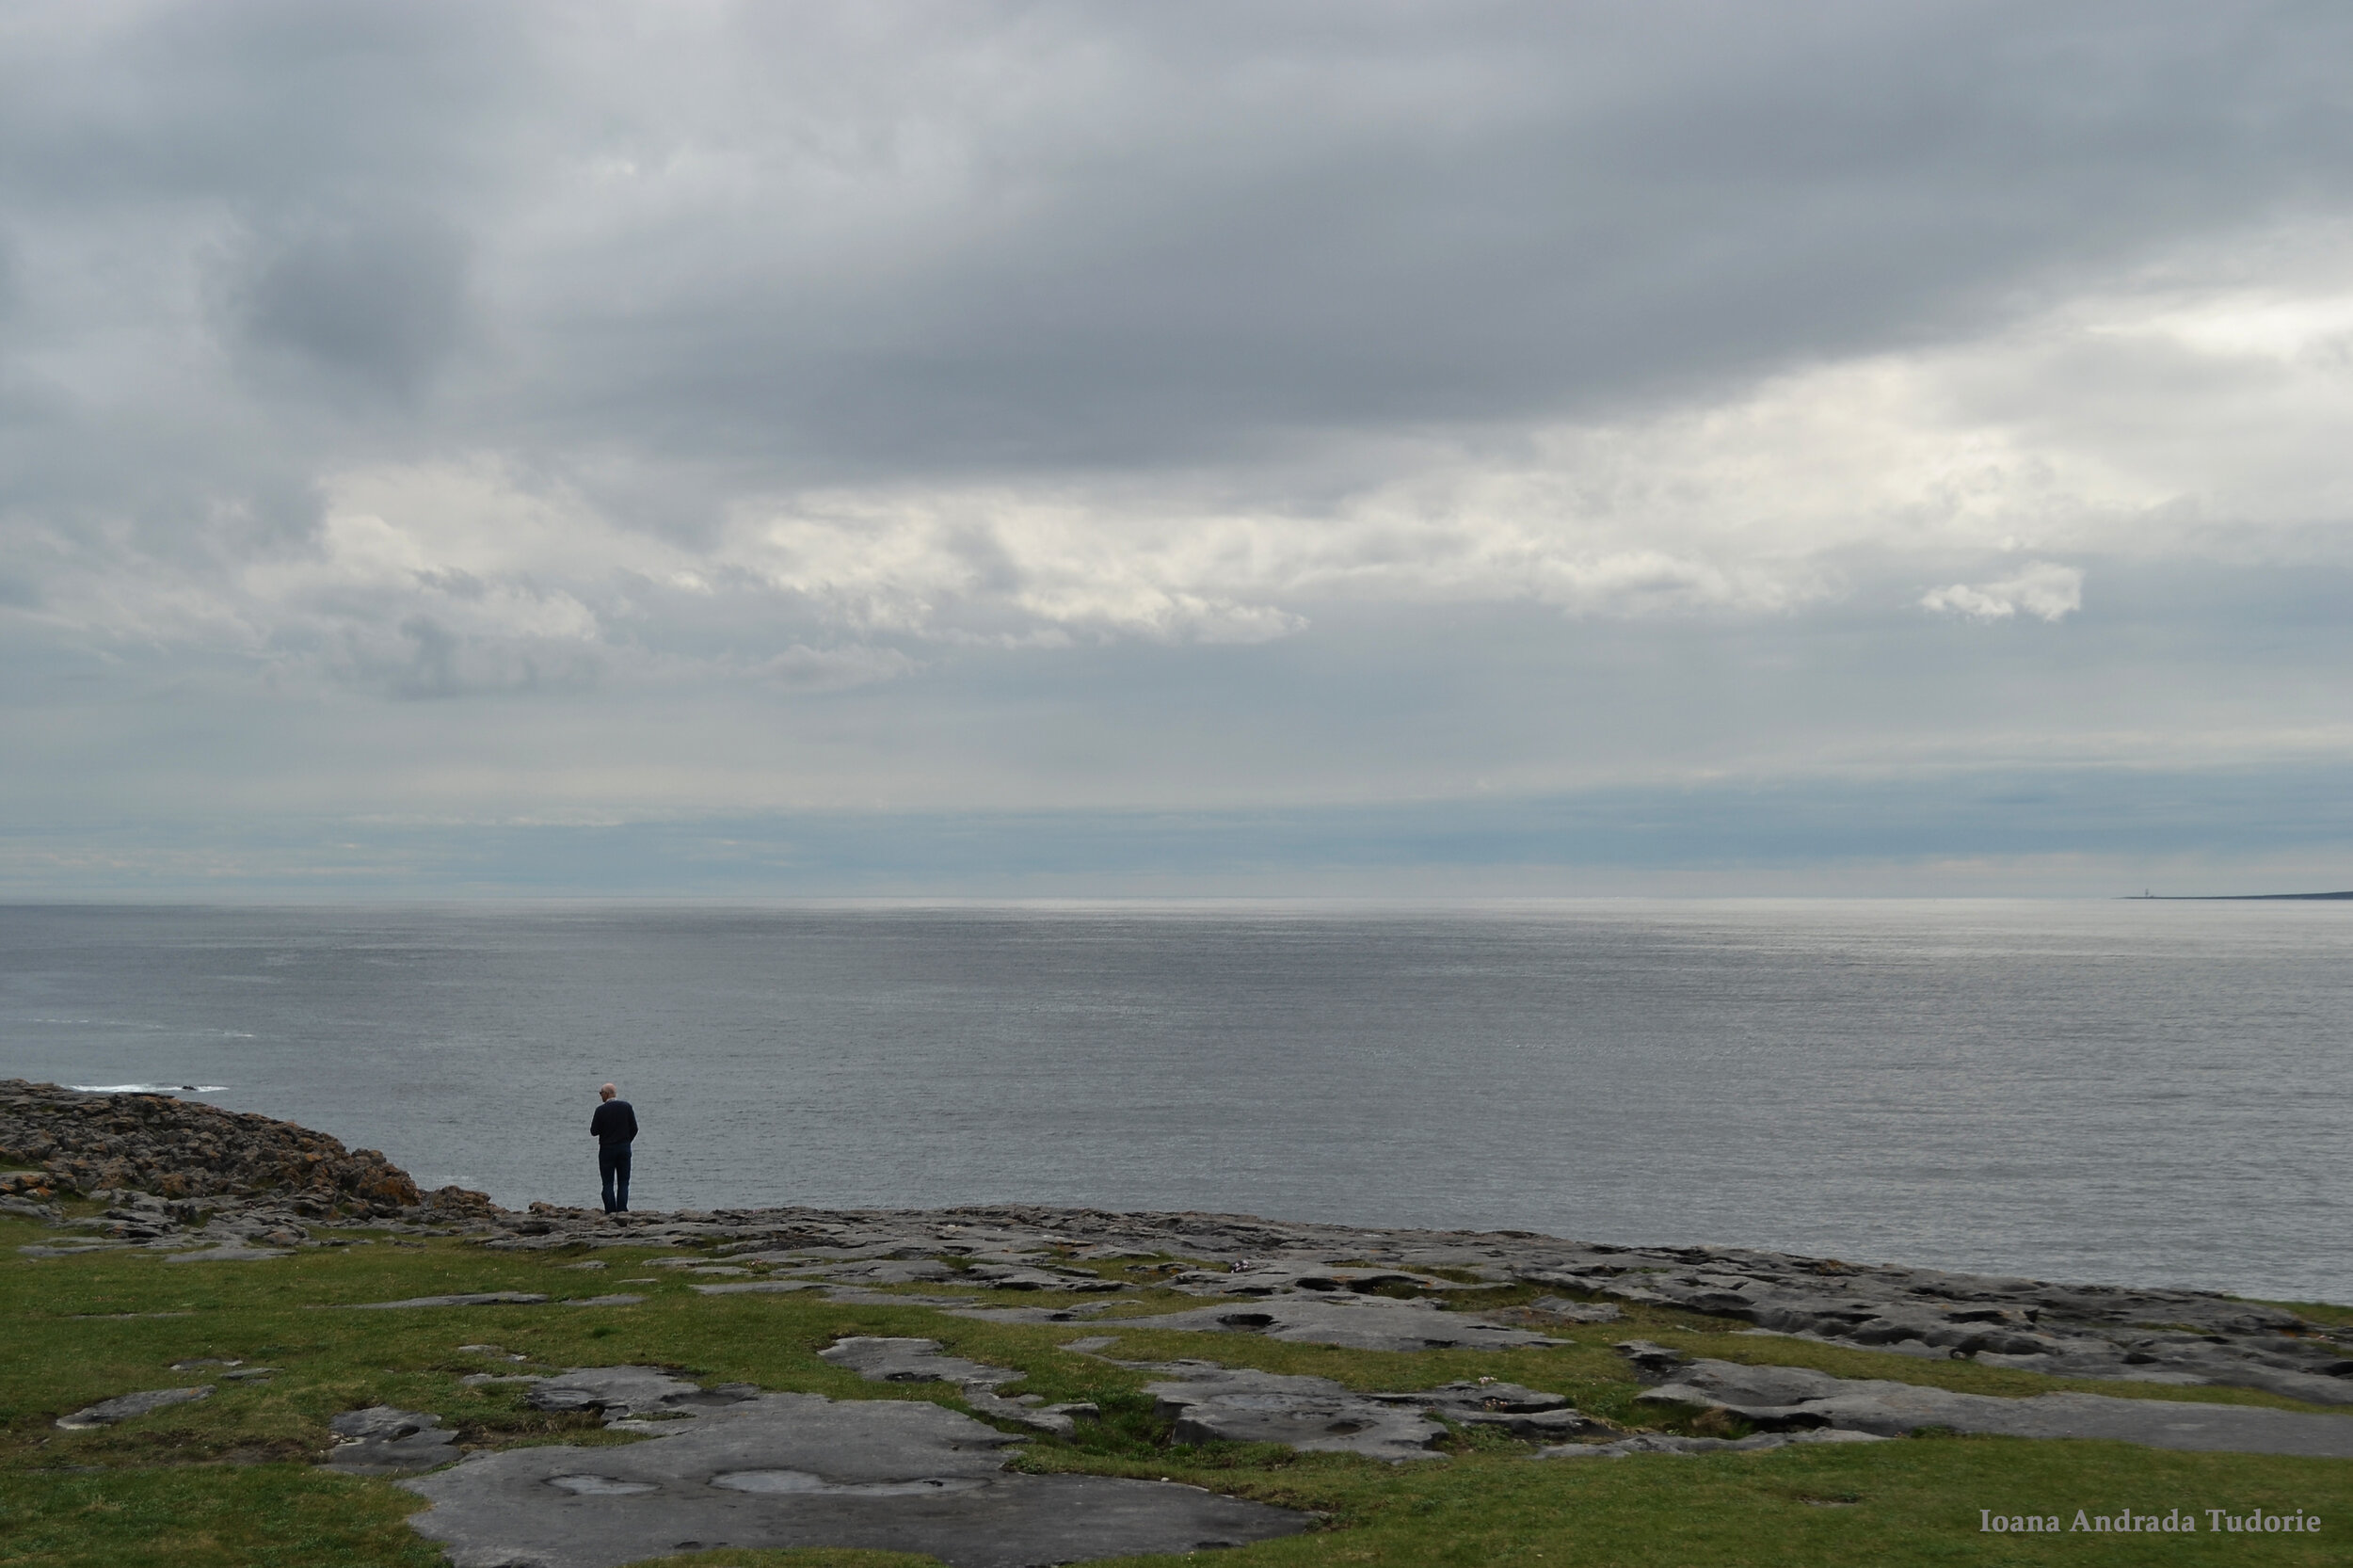 Cliffs of Moher, Ireland, May 2014